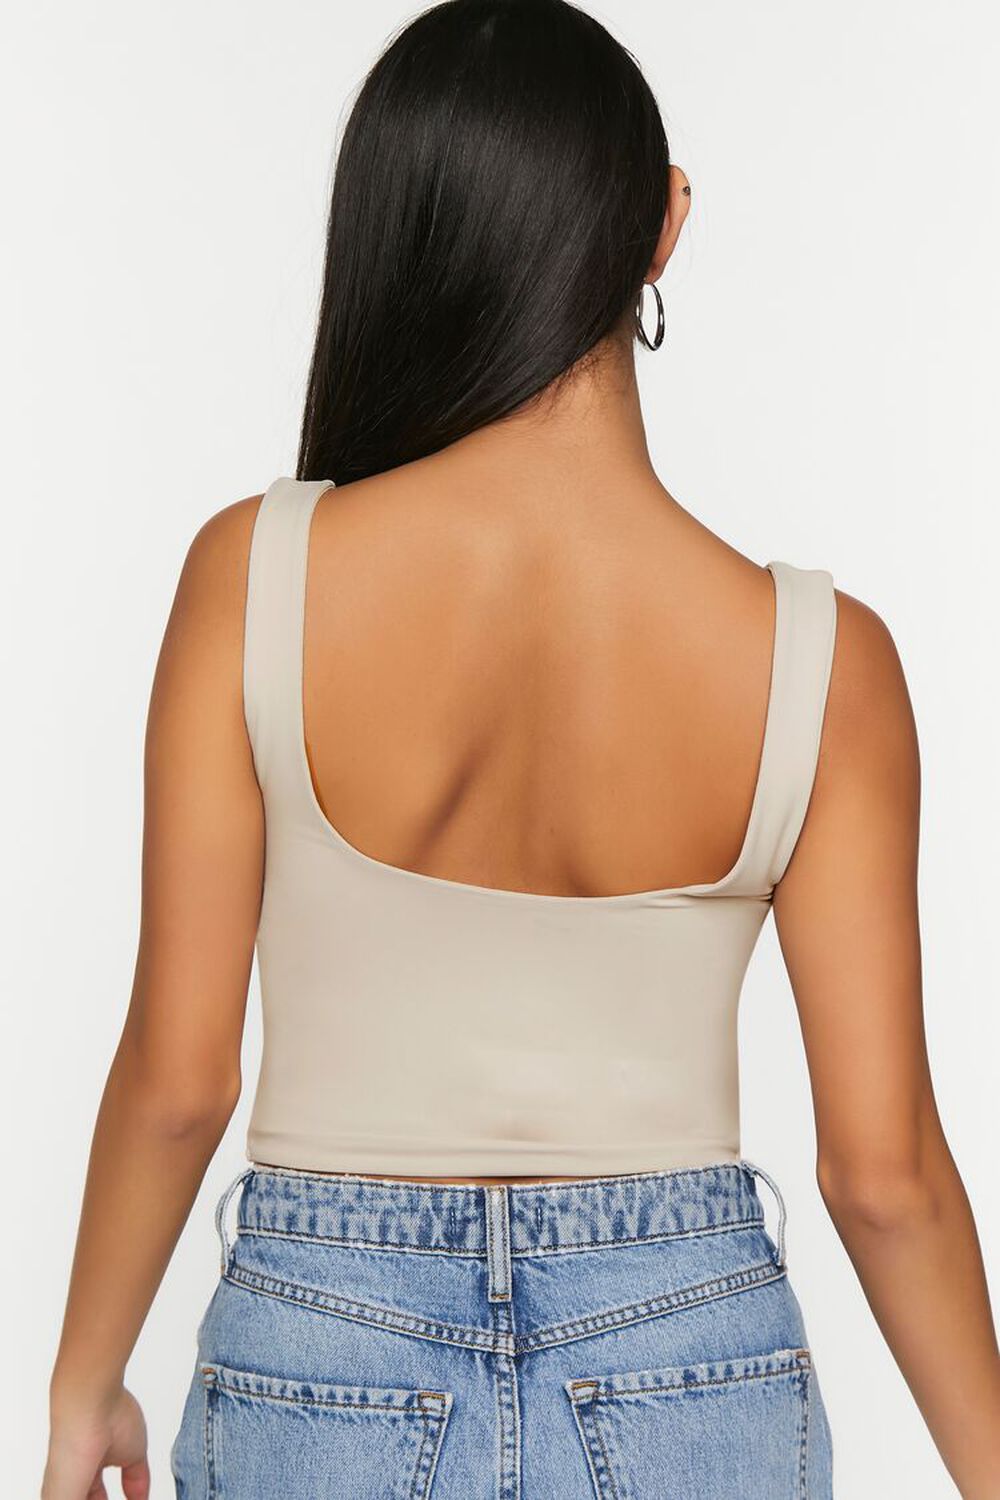 NEUTRAL GREY Cropped Tank Top, image 3